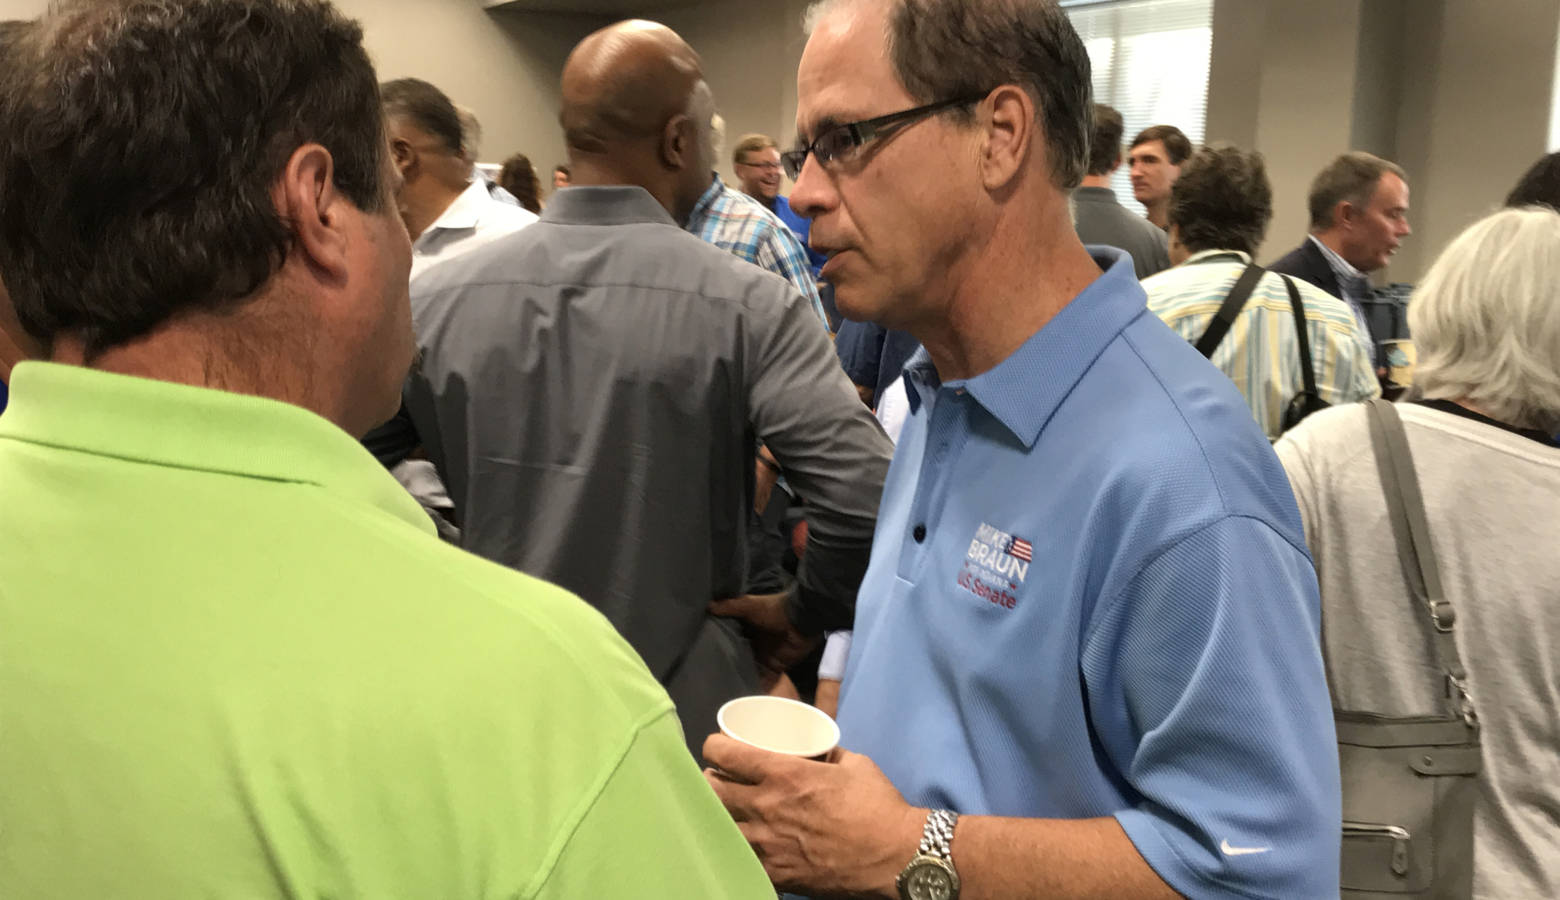 The Indiana Democratic Party filed an ethics complaint against Republican Senate candidate Mike Braun. (Brandon Smith/IPB News)